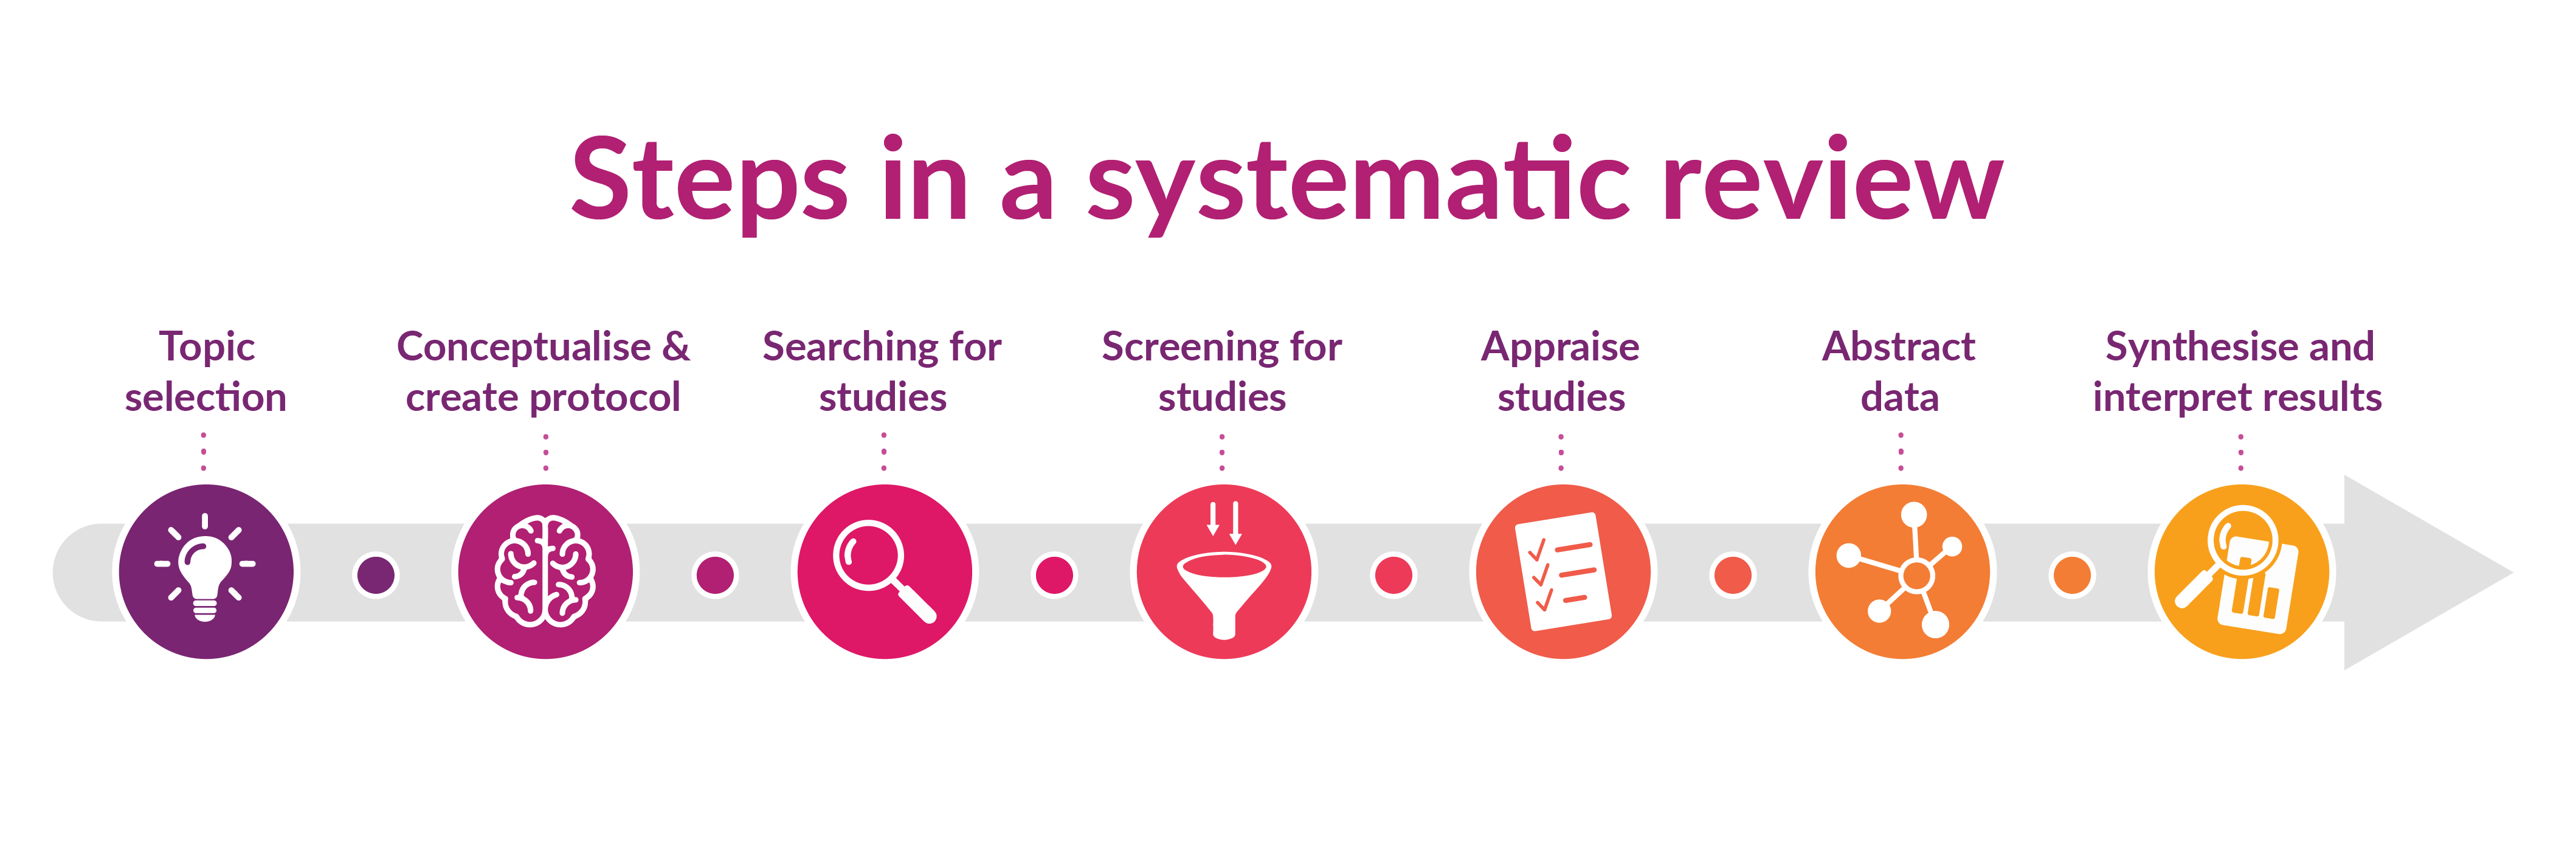 Steps in a systematic review: Topic Selection, Conceptualise and create protocol, Searching for studies, Screening for studies, Appraise studies, Abstract data, Synthesise and interpret results